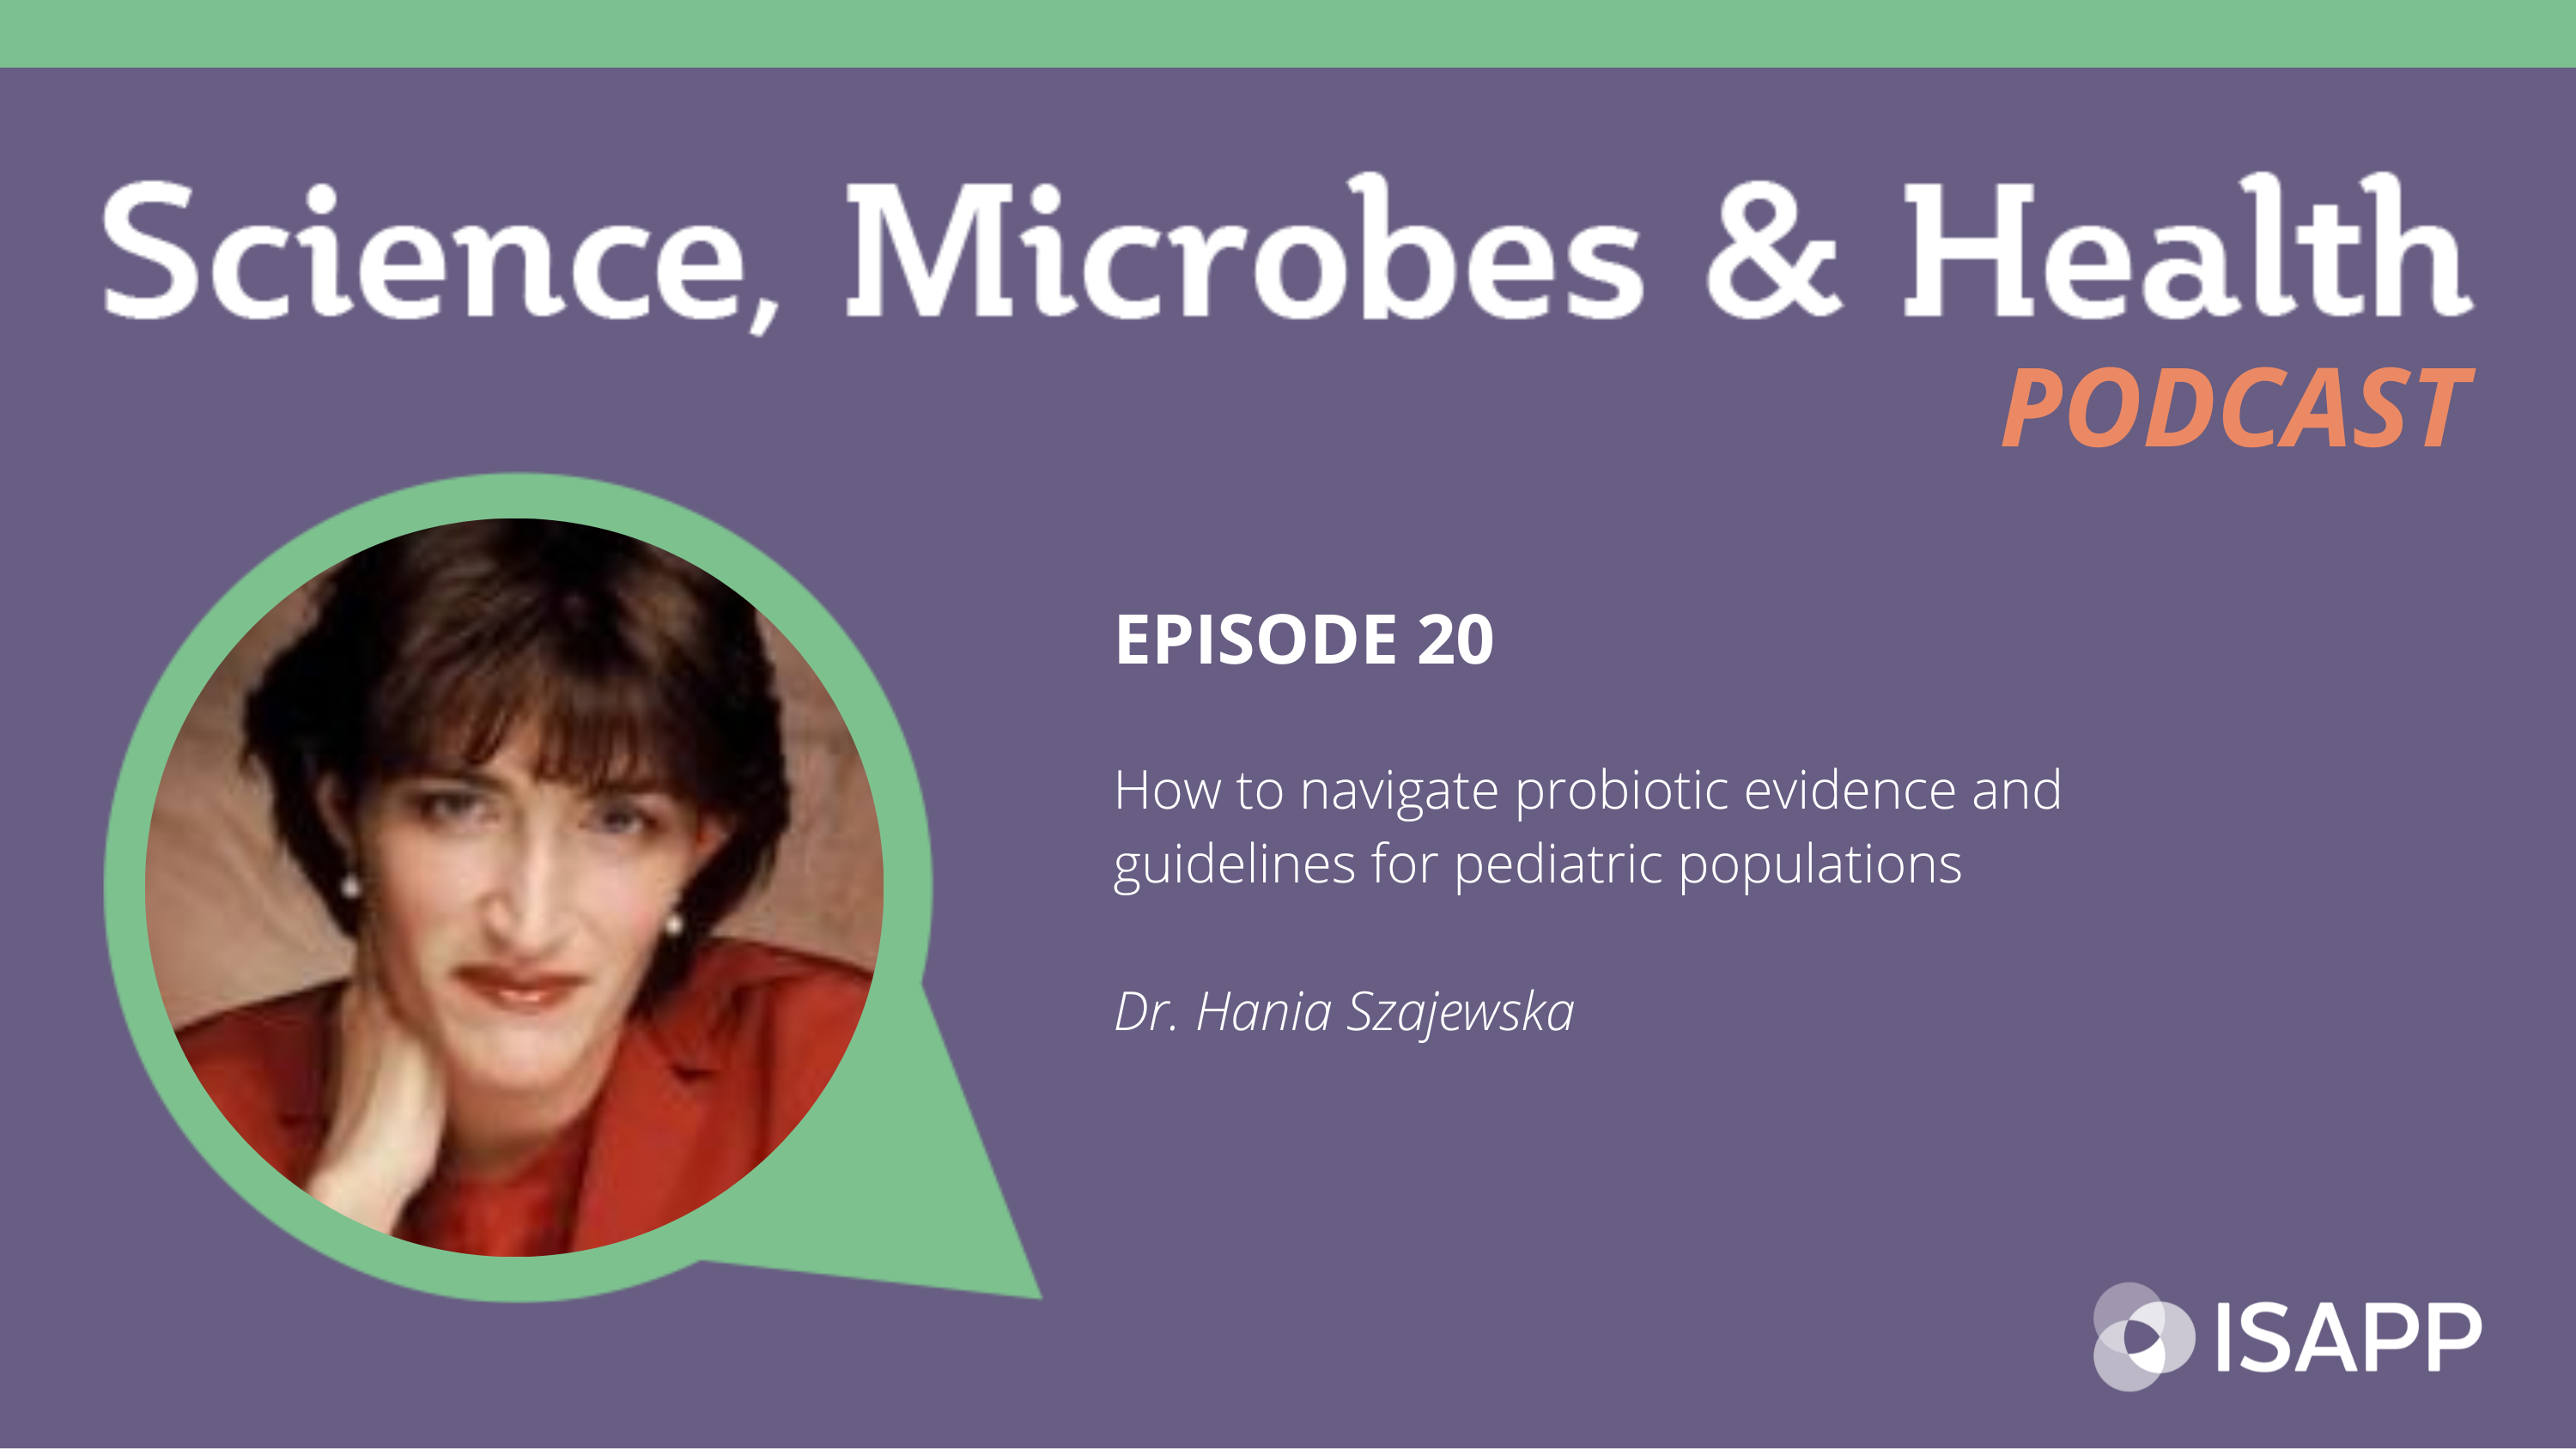 How to navigate probiotic evidence and guidelines for pediatric populations